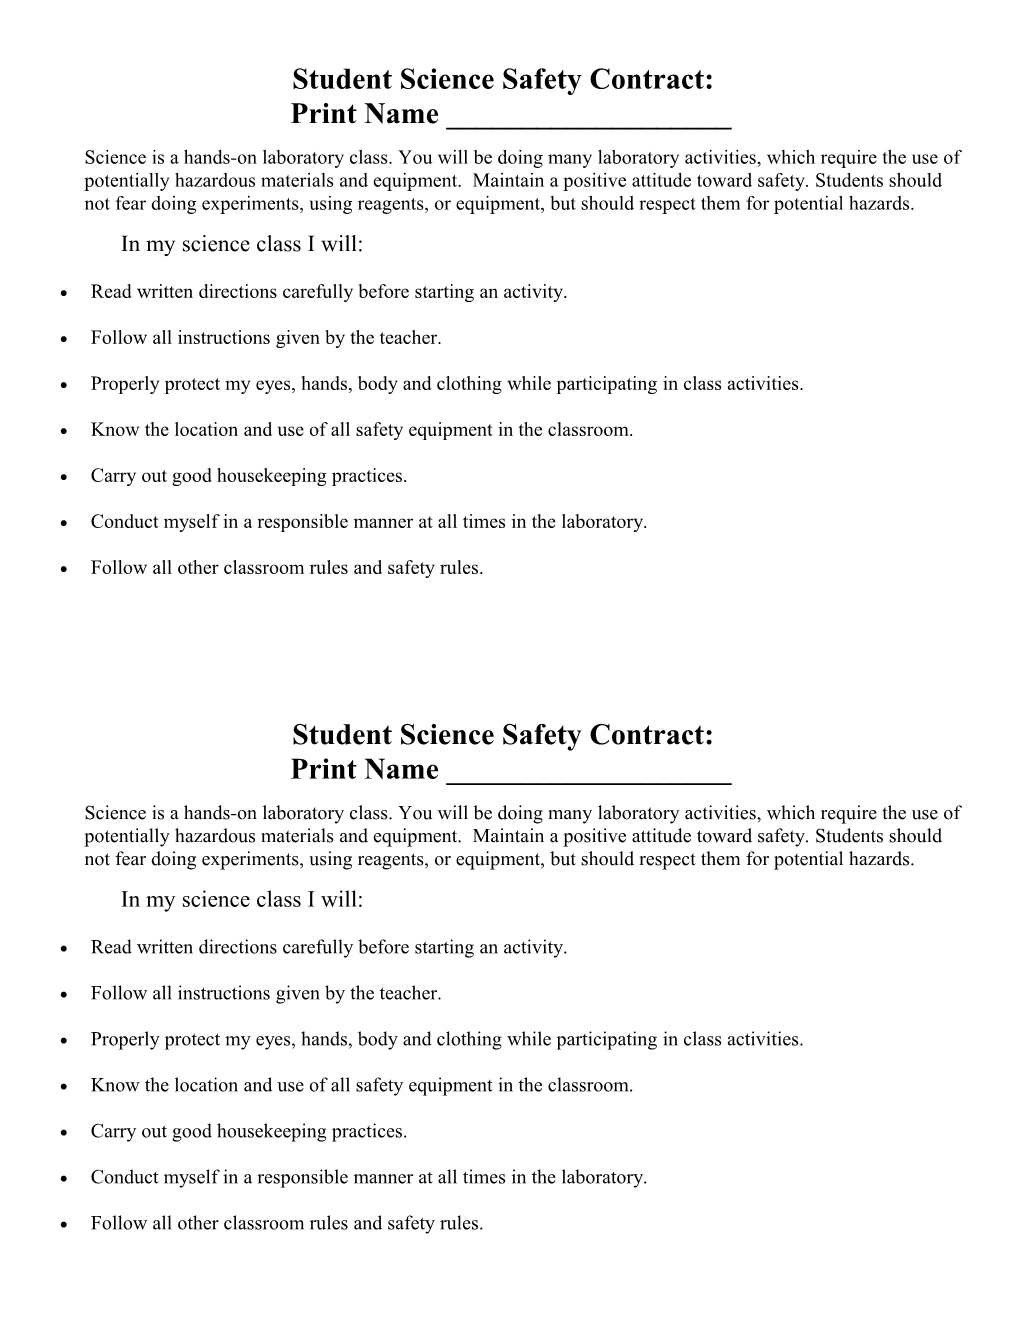 Student Science Safety Contract